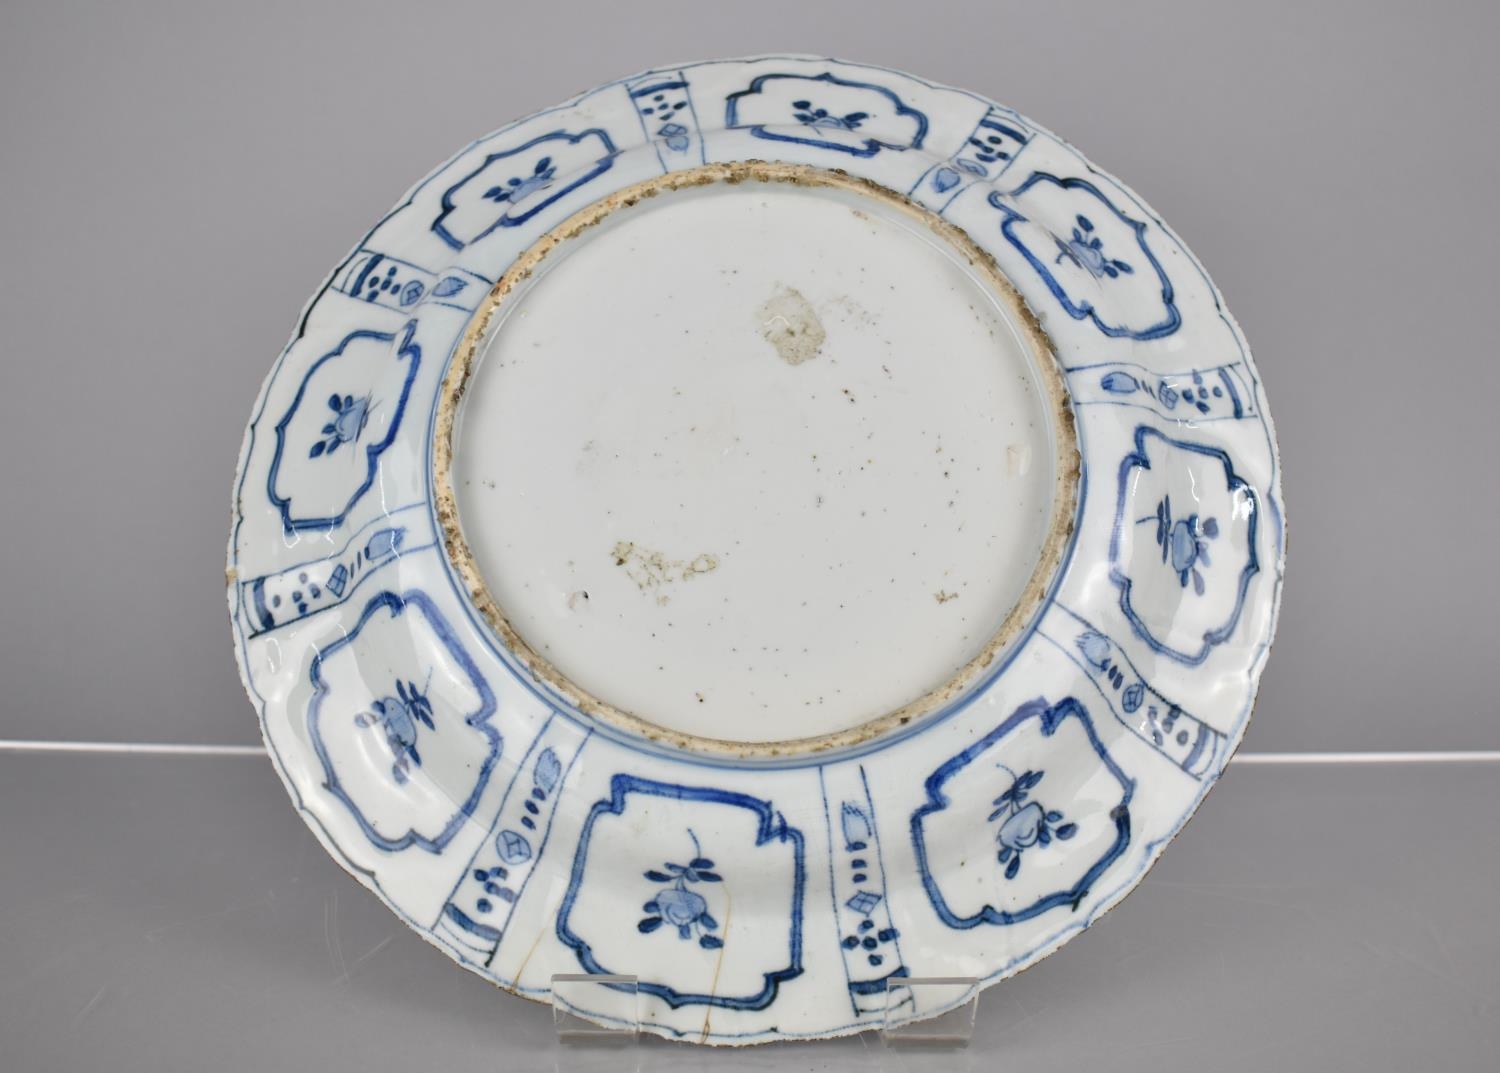 An Early Chinese Porcelain, Probably Kangxi Period (1662-1722) Blue and White Plate Decorated with - Image 4 of 4